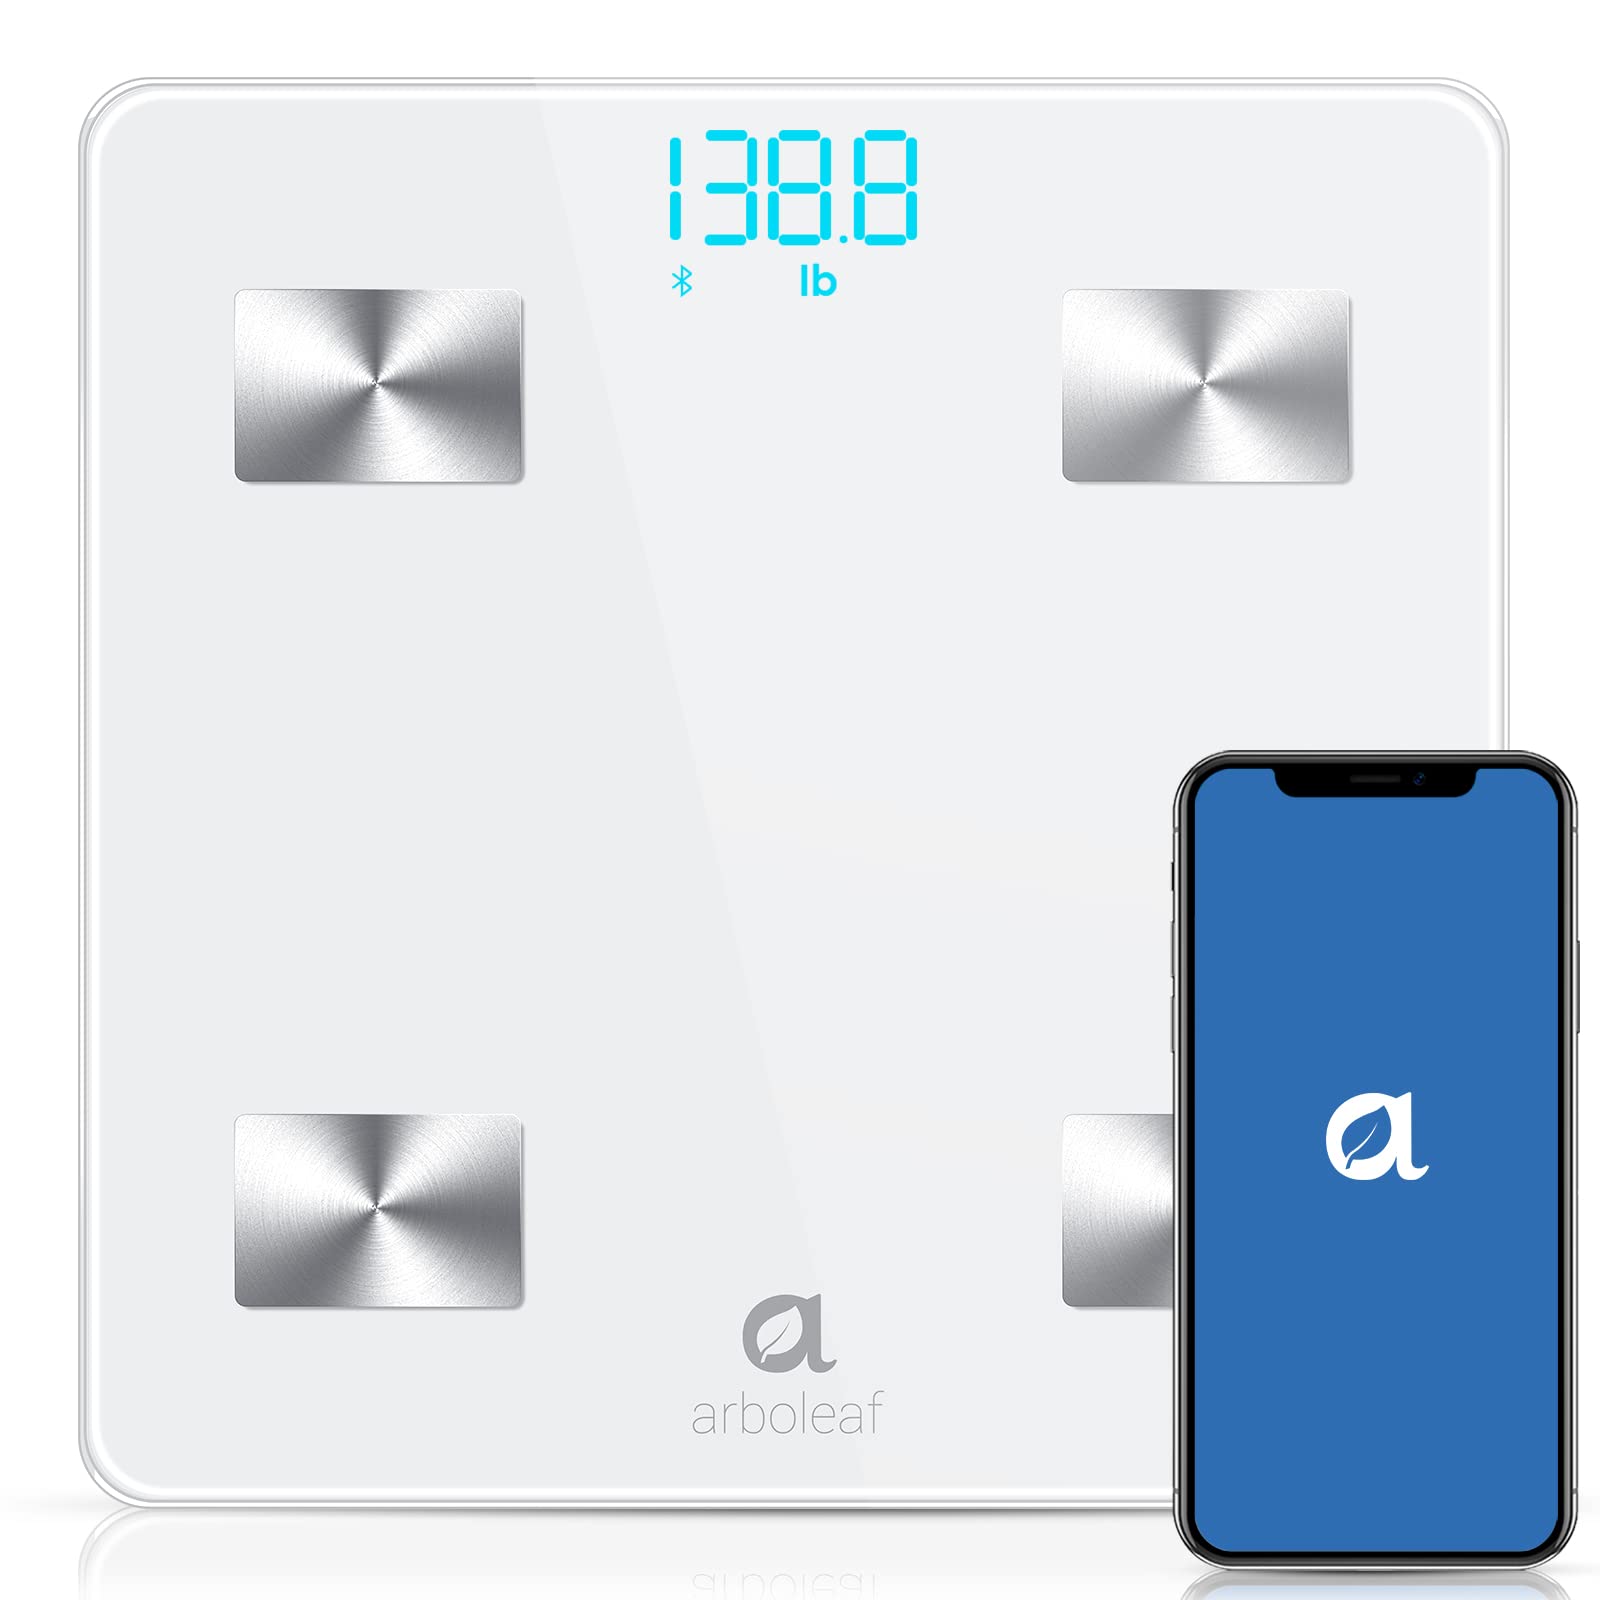  arboleaf Scale for Body Weight, Highly Accurate Weight Scale,  Smart Bathroom Scale, 14 Key Body Composition Analysis Sync Apps, 5 to 400  lbs White : Health & Household